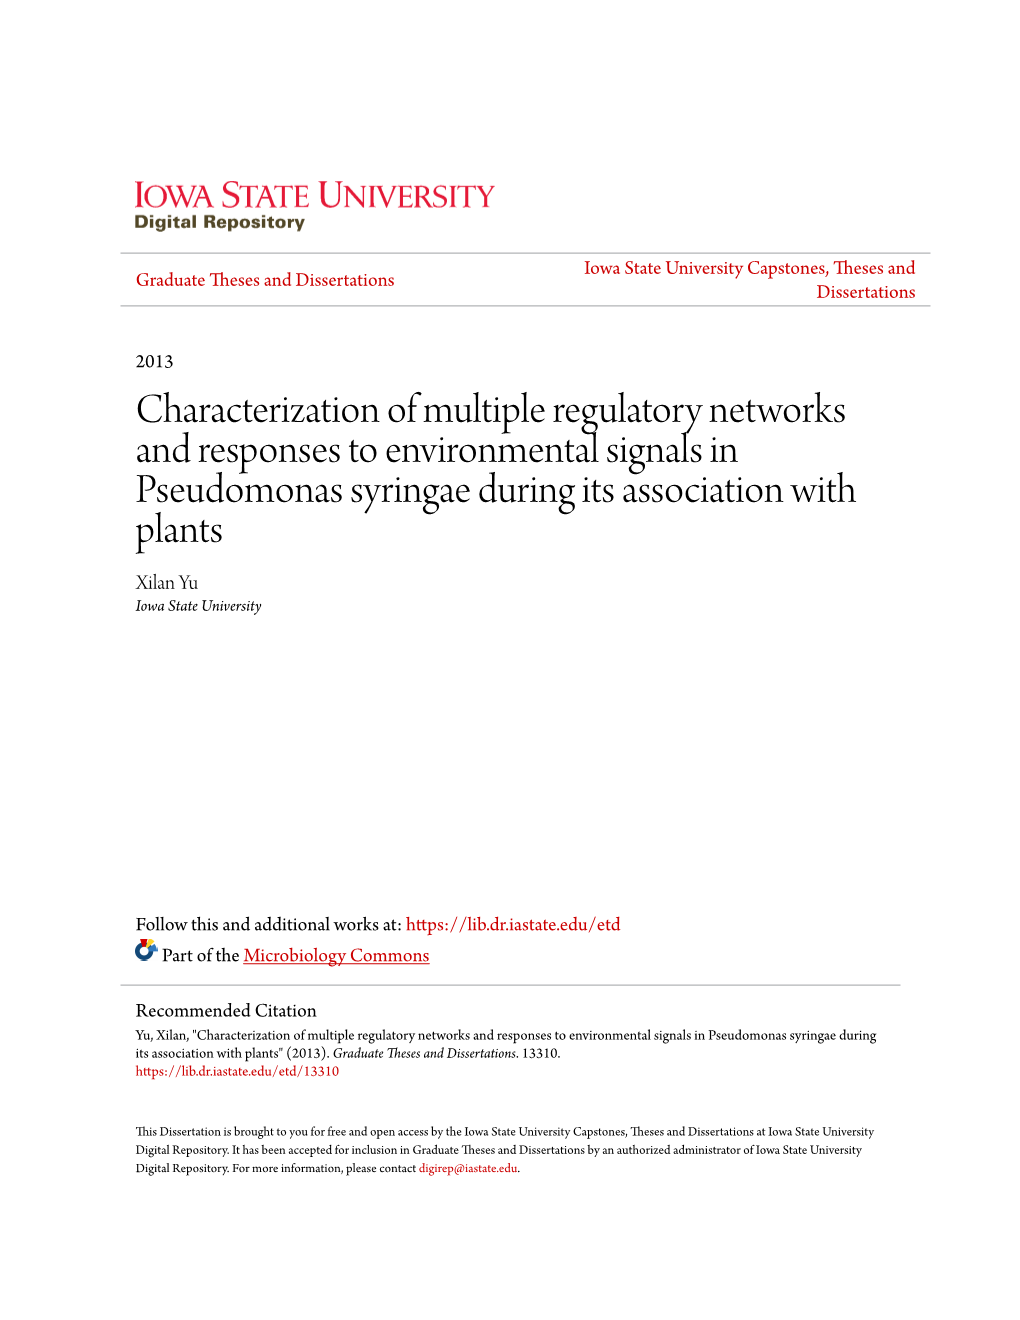 Characterization of Multiple Regulatory Networks and Responses To